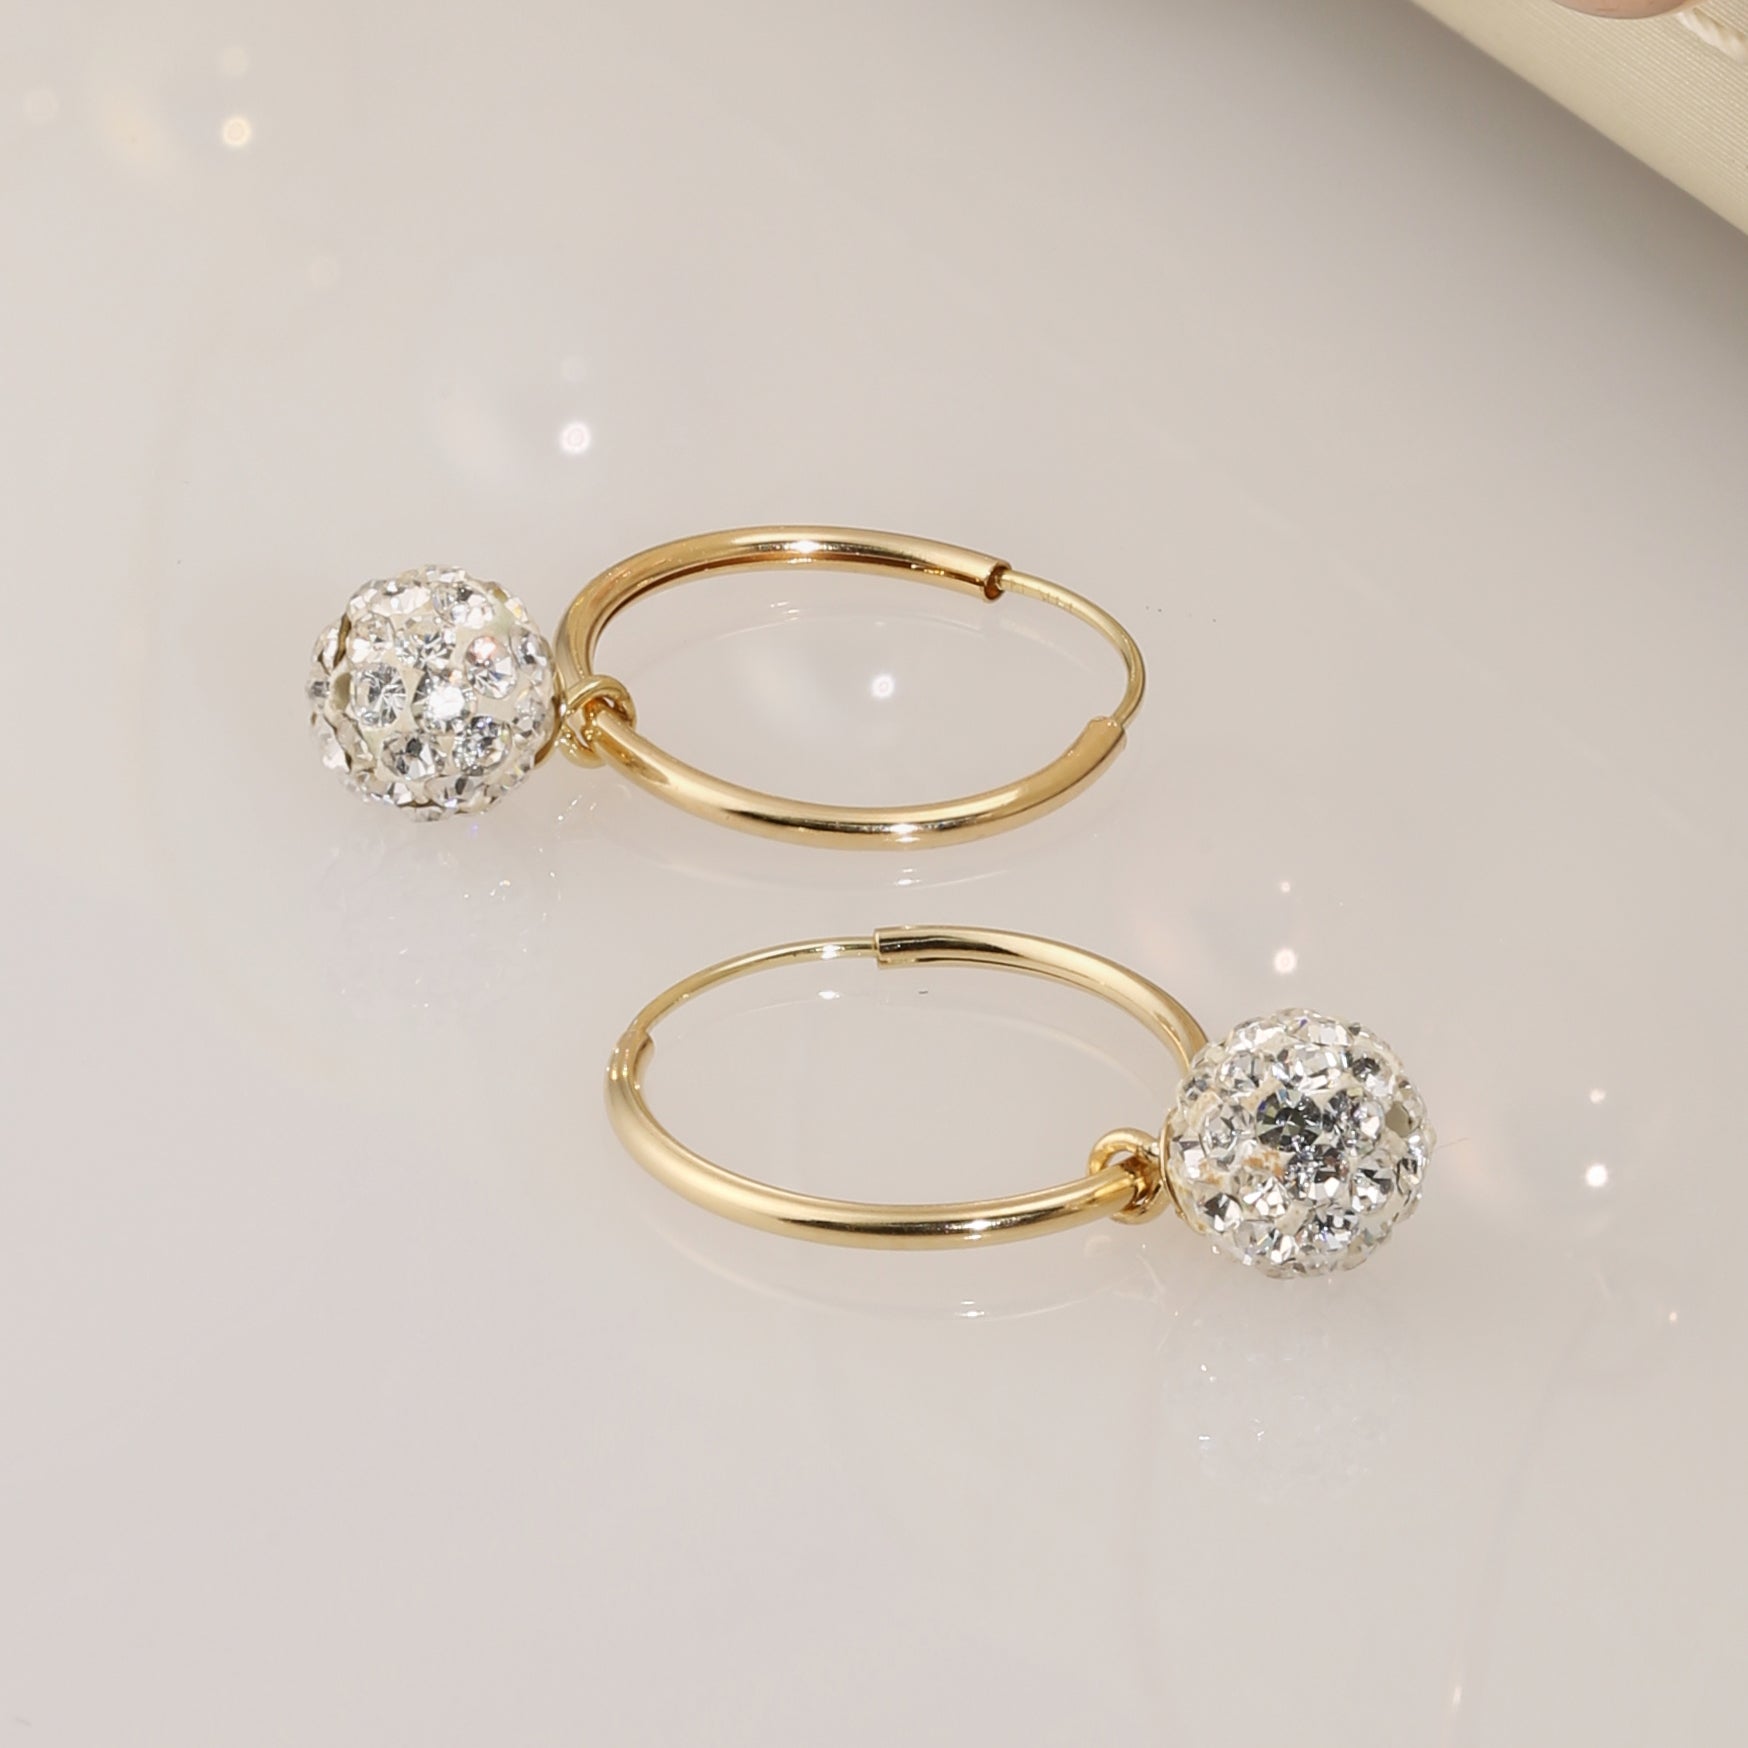 14k Yellow Gold Endless Hoops with Crystal Balls